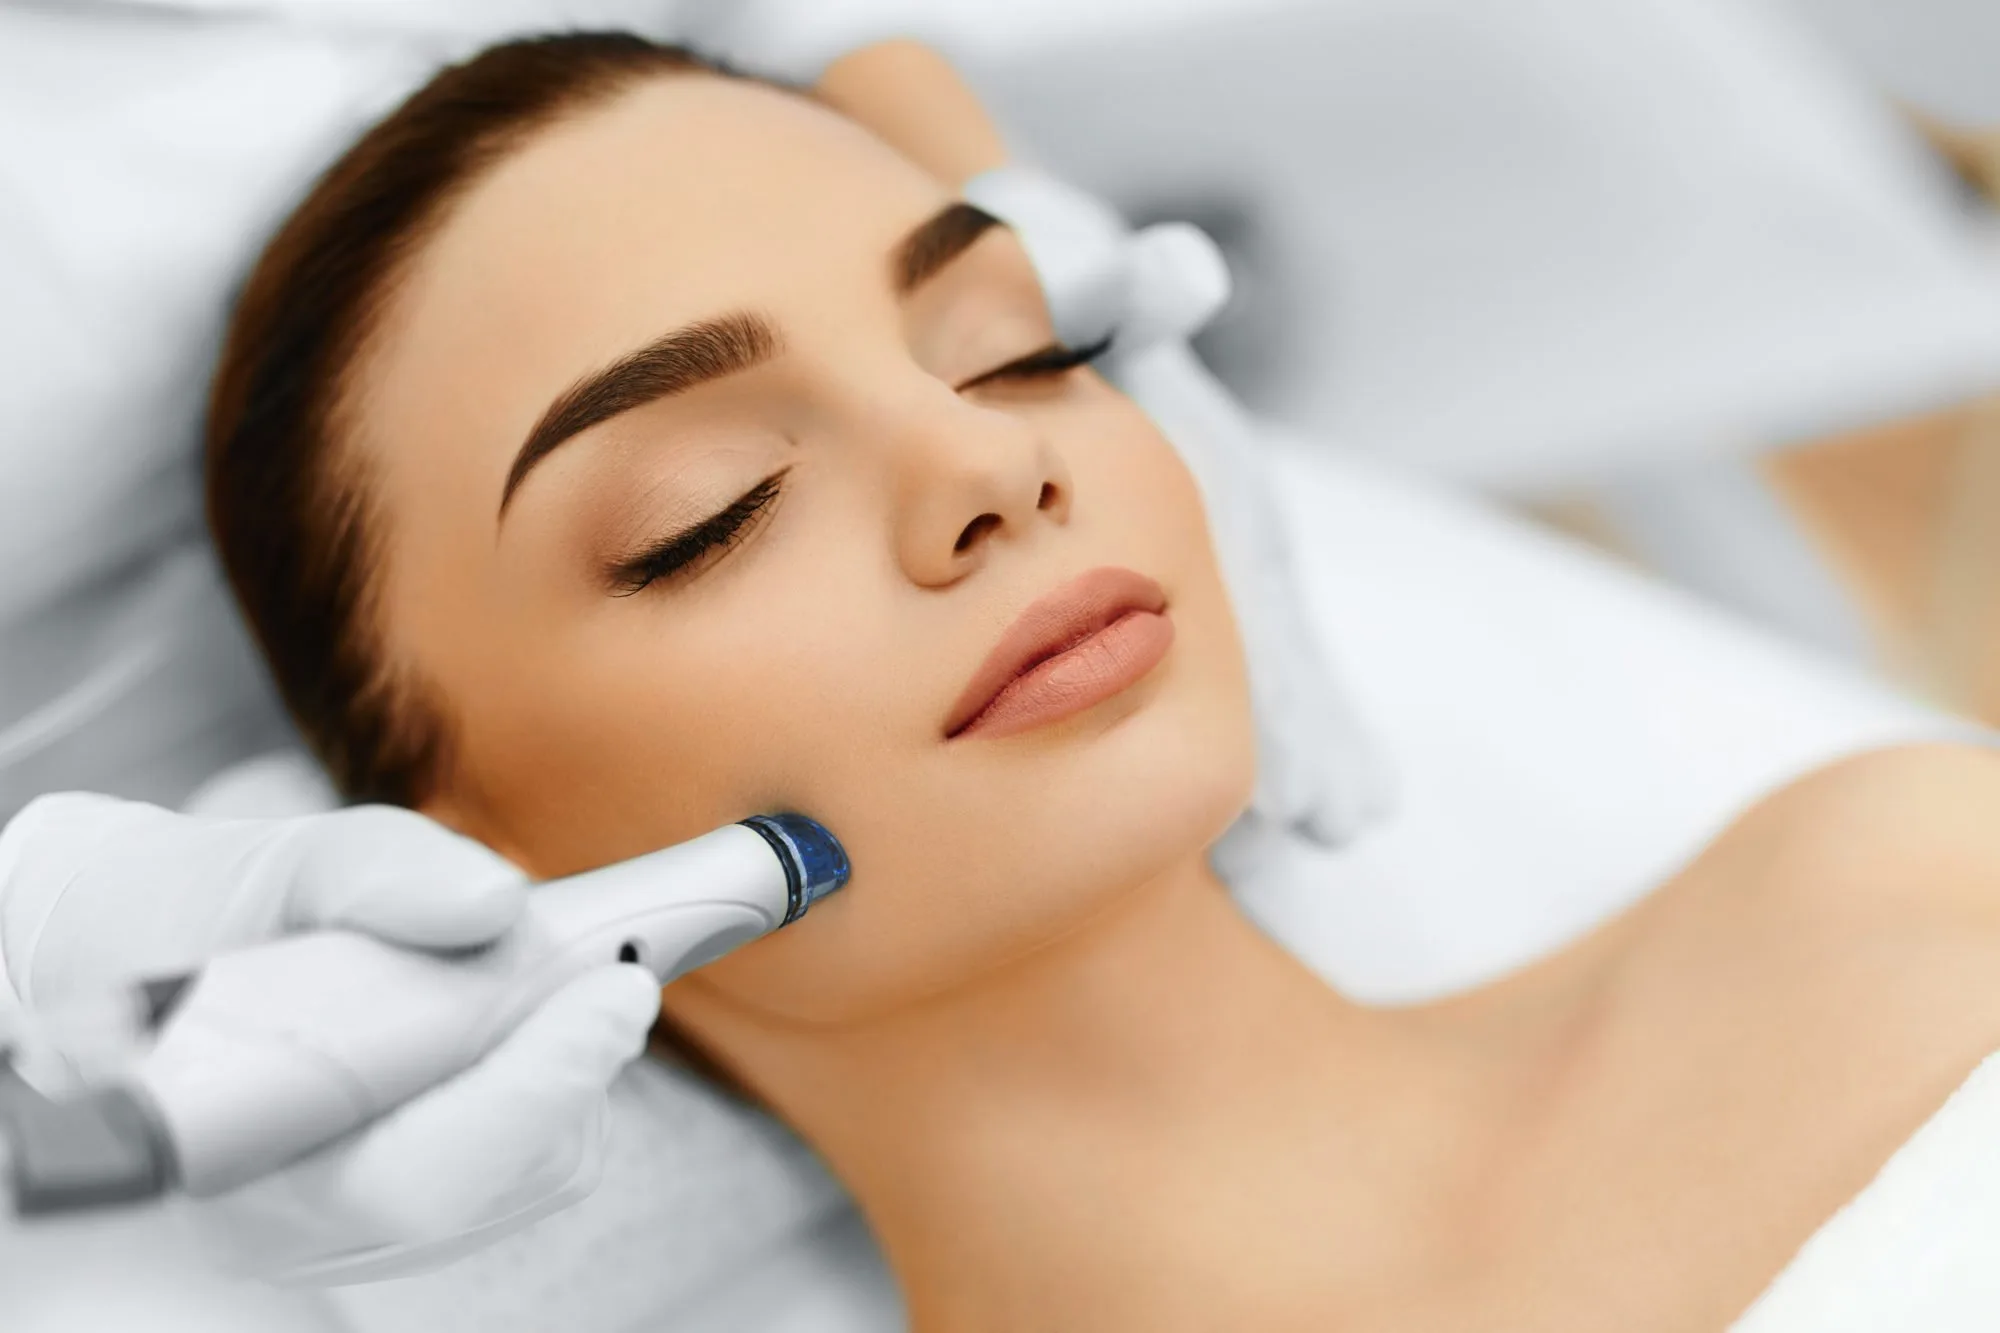 Newest Technologies For Medical Aesthetic Treatments